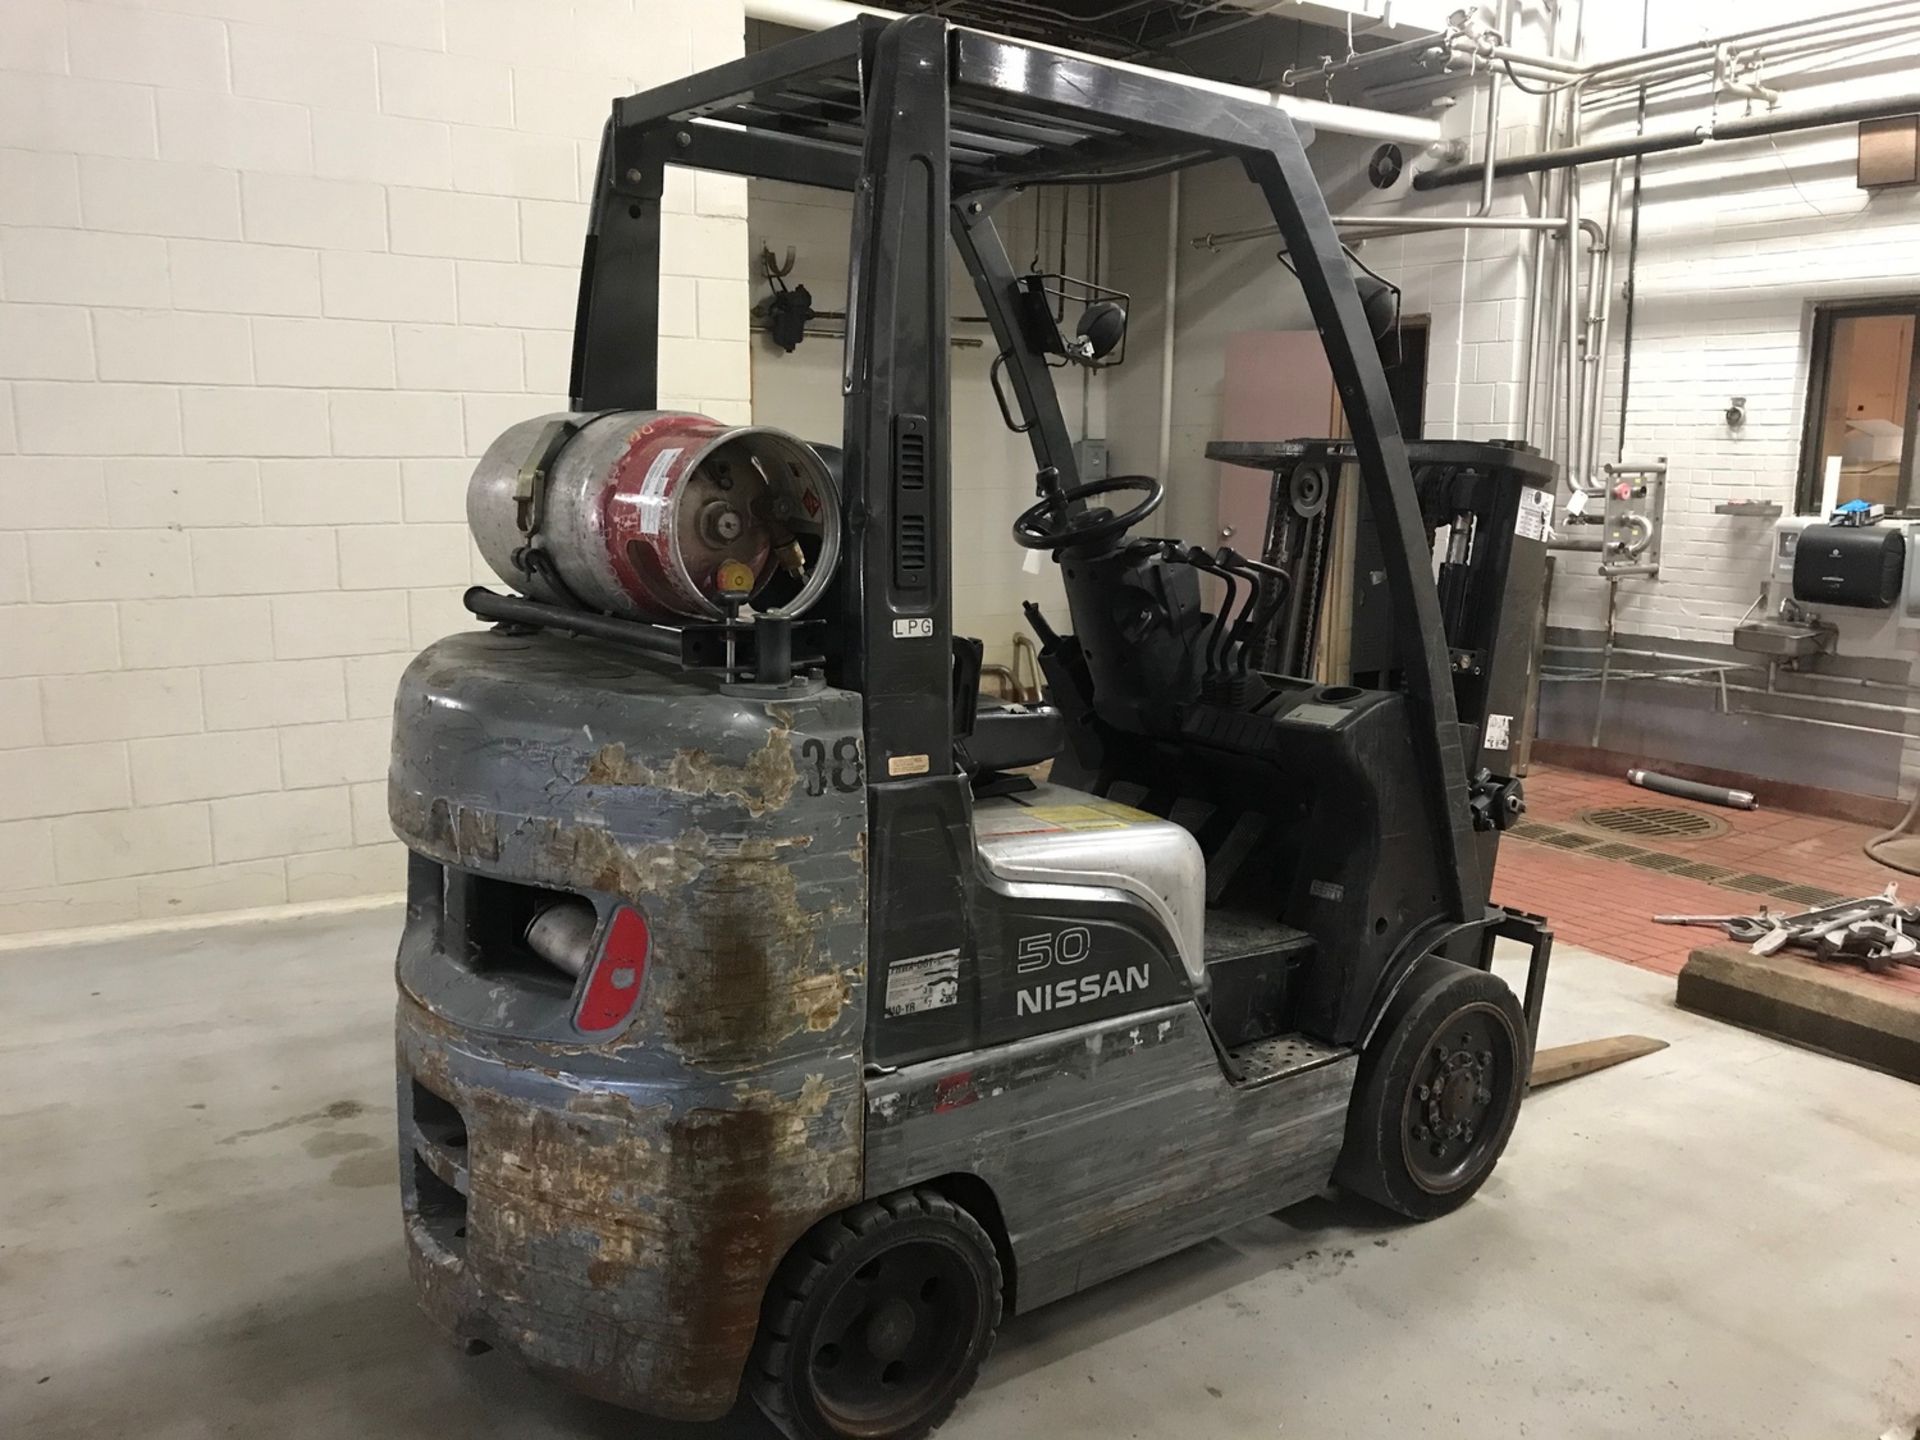 Nissan 5000lb Capacity Fork Lift, Model # MCUL02A25LV, Propane, (Tank Not Included) Serial # CUL02- - Image 2 of 2